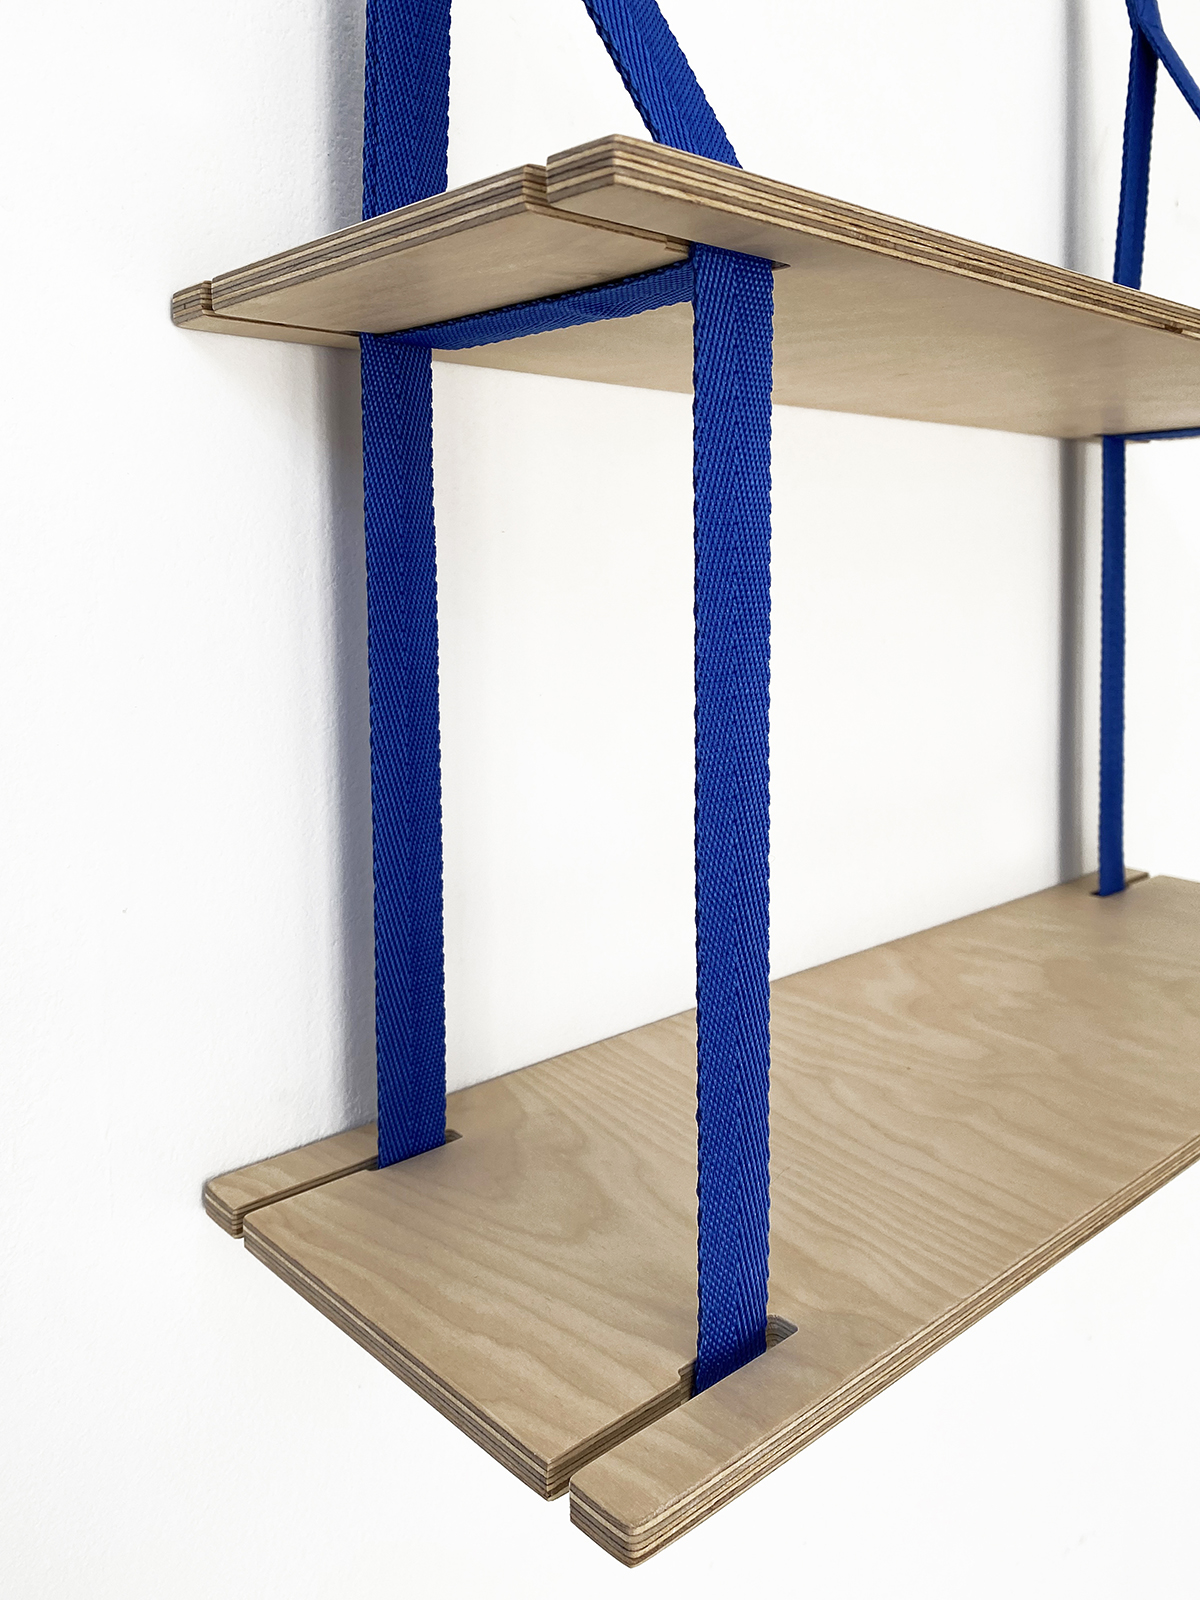 Birch plywood double shelves, hand finished, available in a range of strap colour